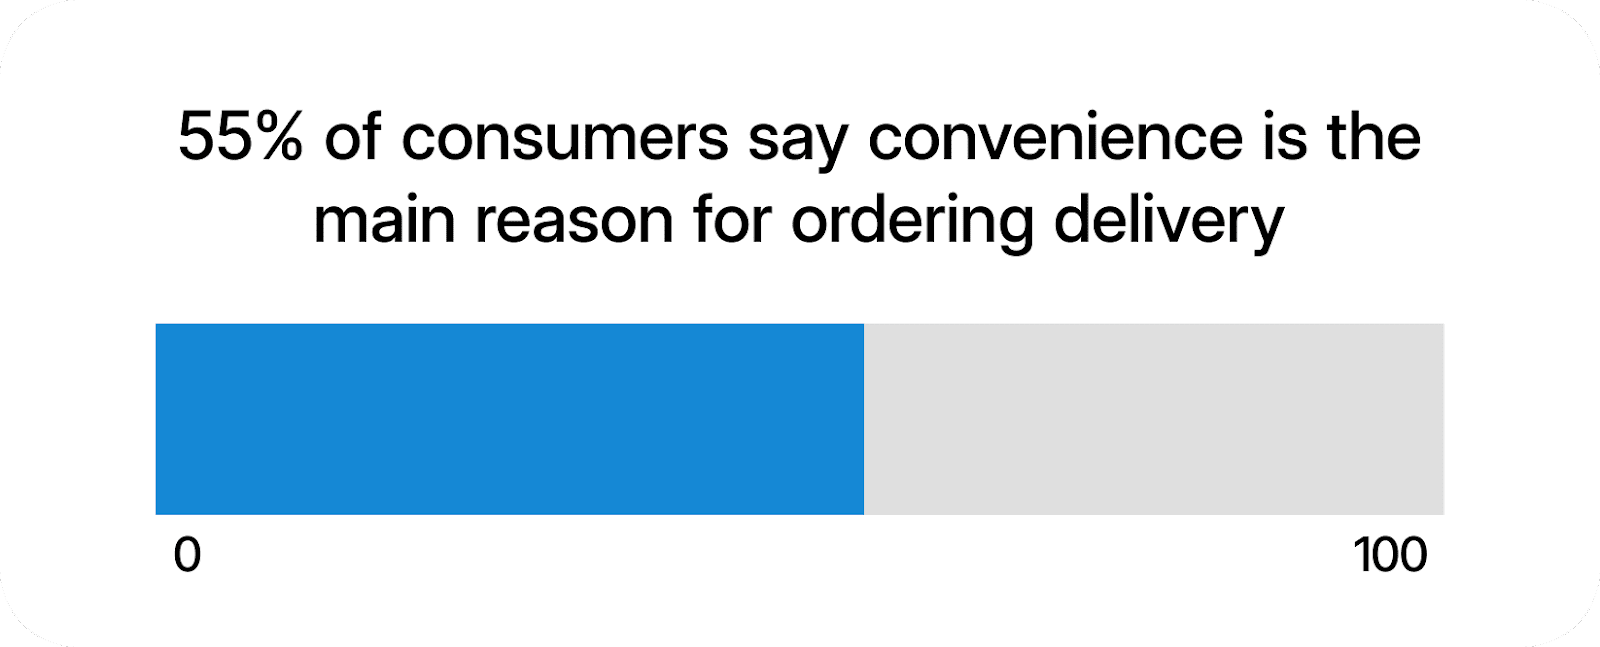 55% of consumers say convenience is the main reason for ordering delivery